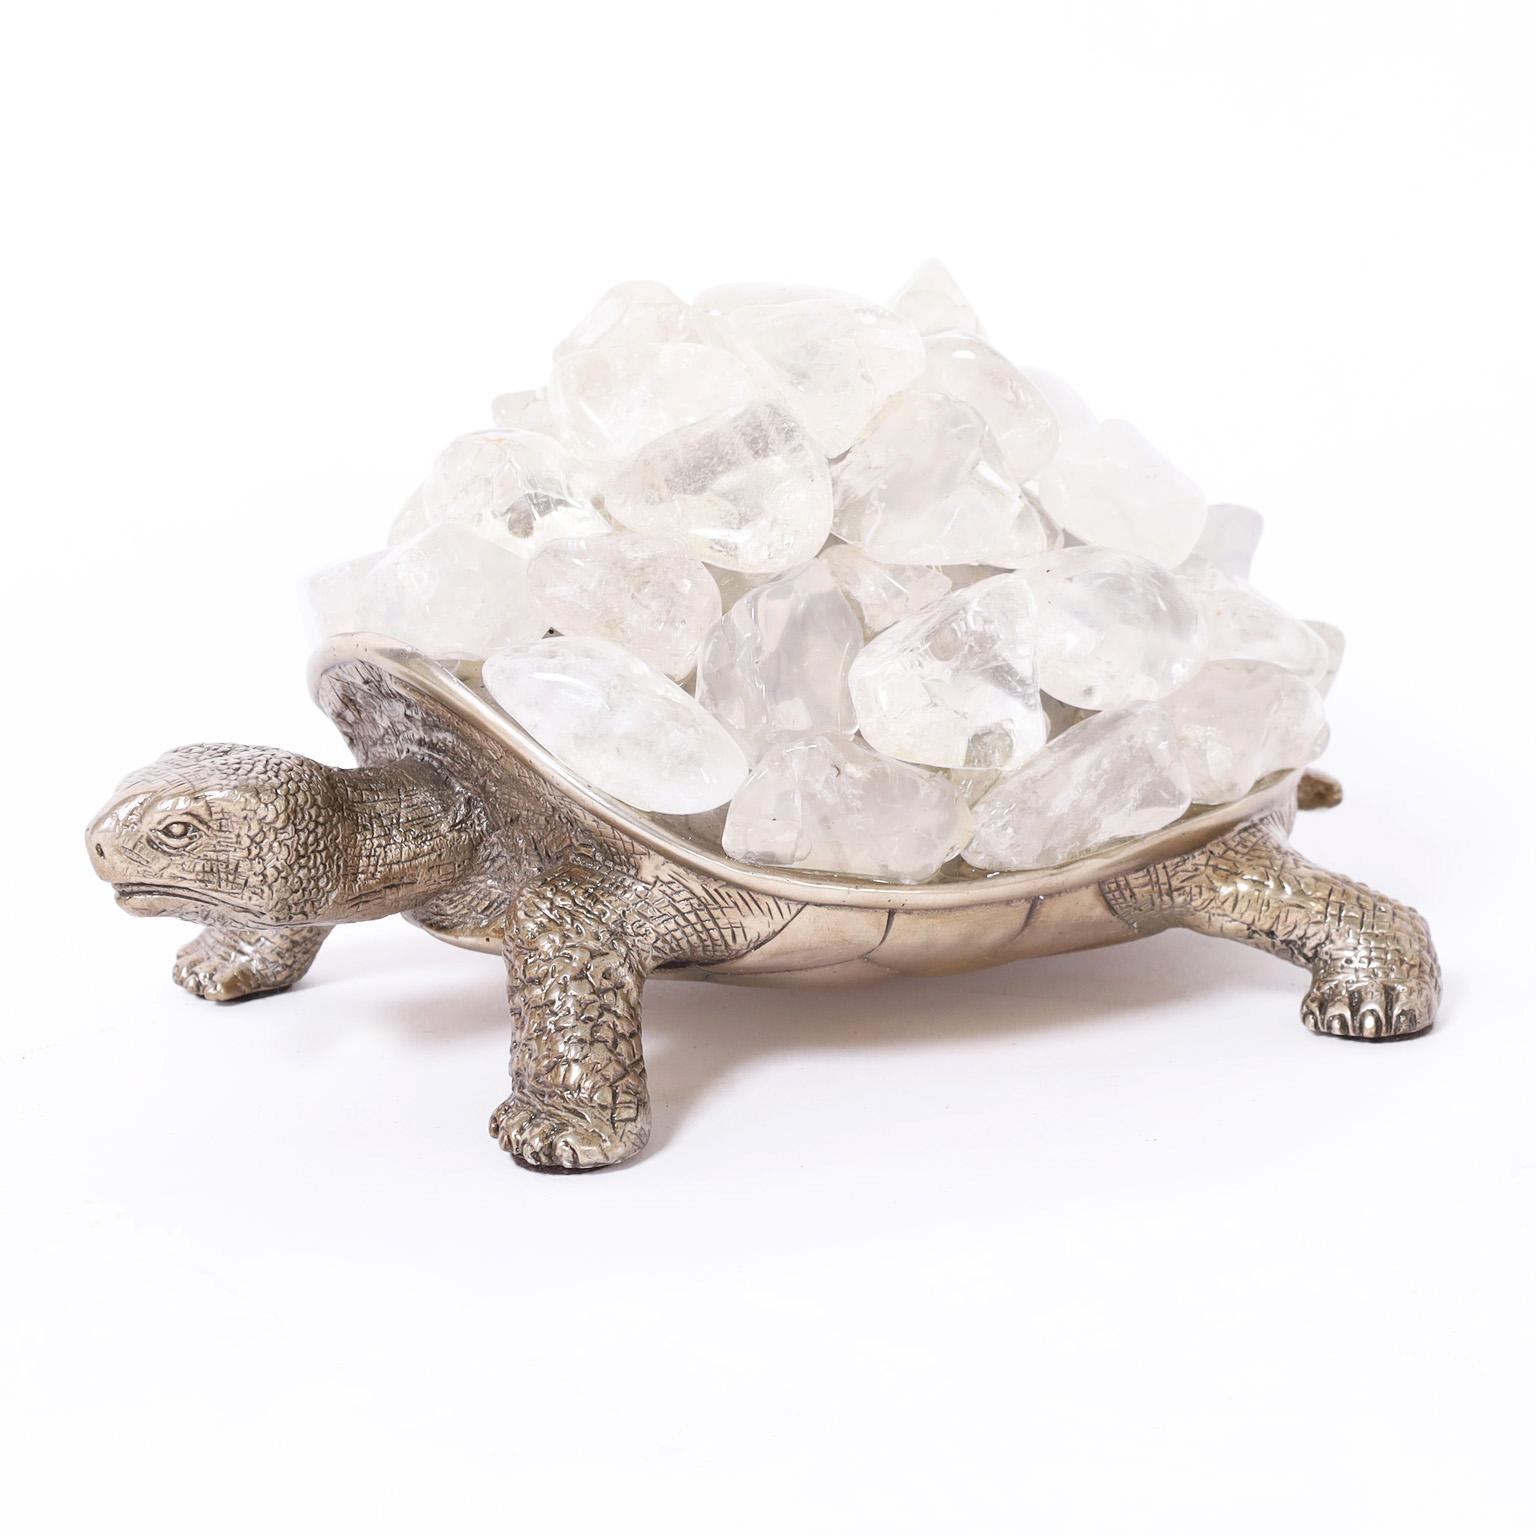 Silver Plate Turtle with Crystal Rocks - Sculpture by Unknown